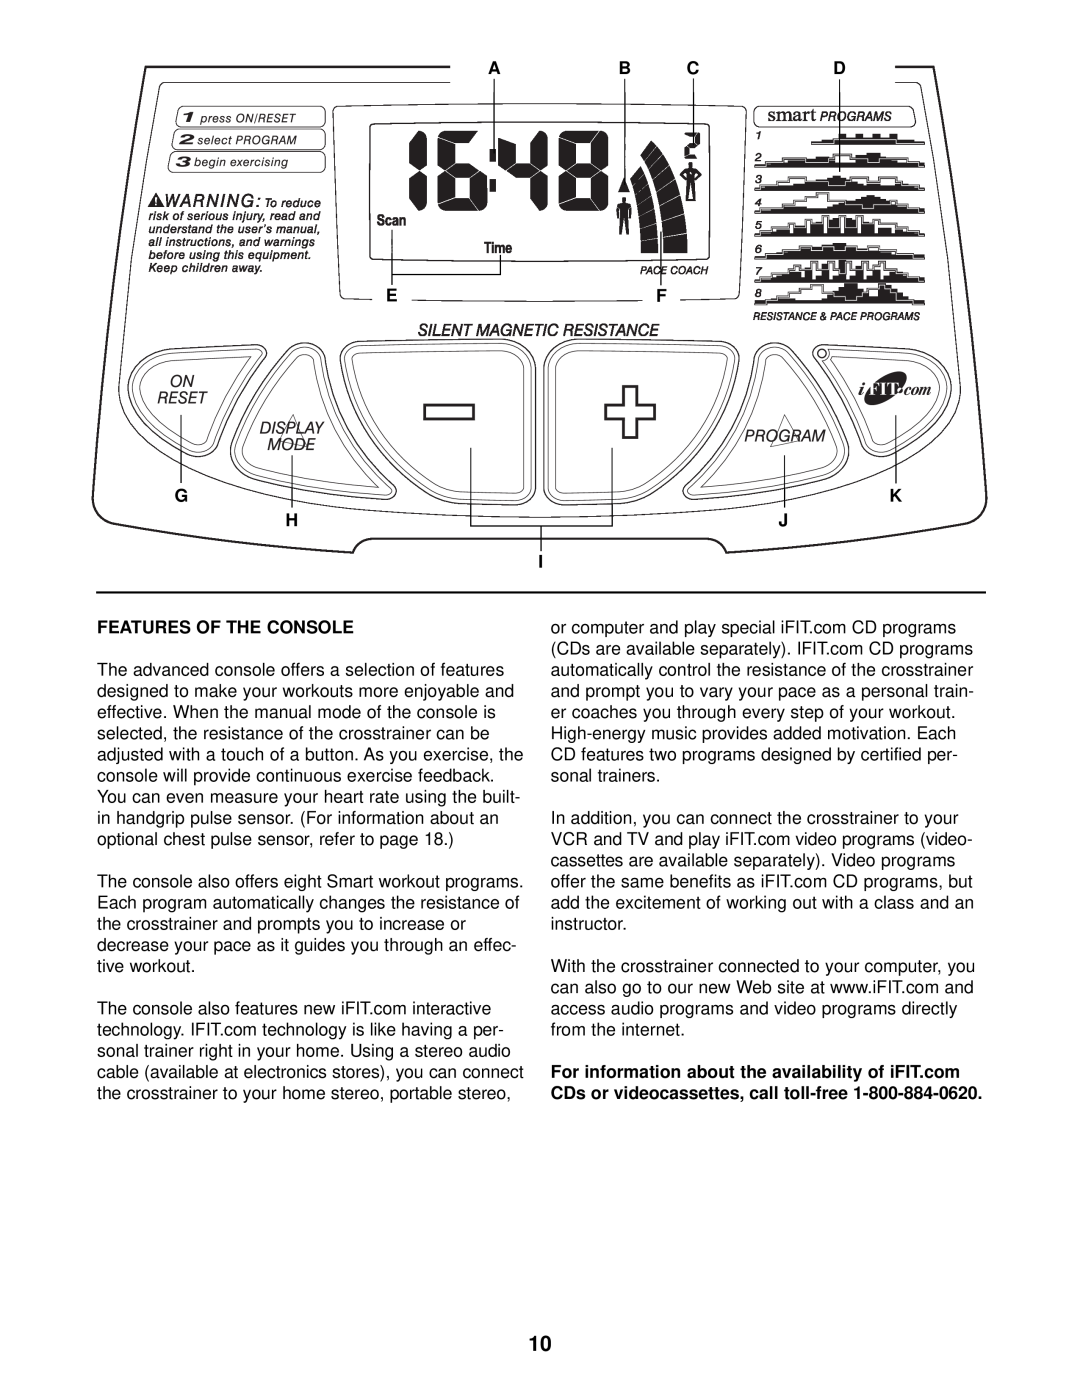 ProForm PFEX39910 user manual Ab Cd, K J I, Features Of The Console 